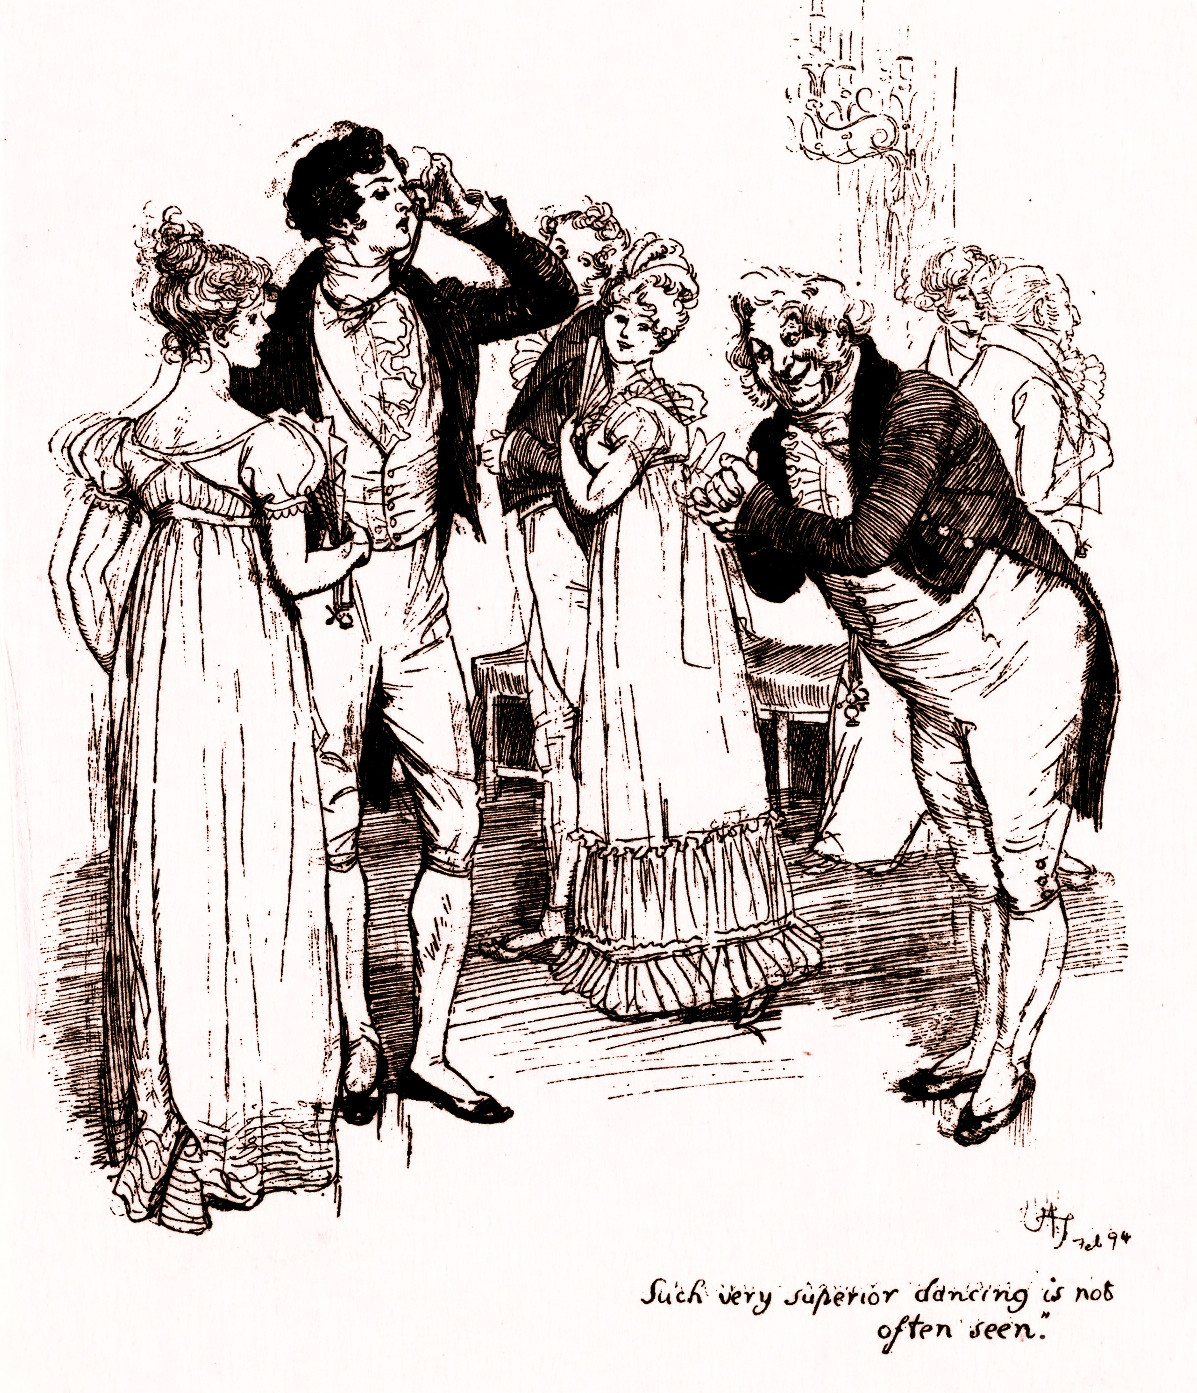 "Such very superior dancing is not often seen", original illustration by Hugh Thomson (1860-1920) for Pride and Prejudice by Jane Austen, 1894